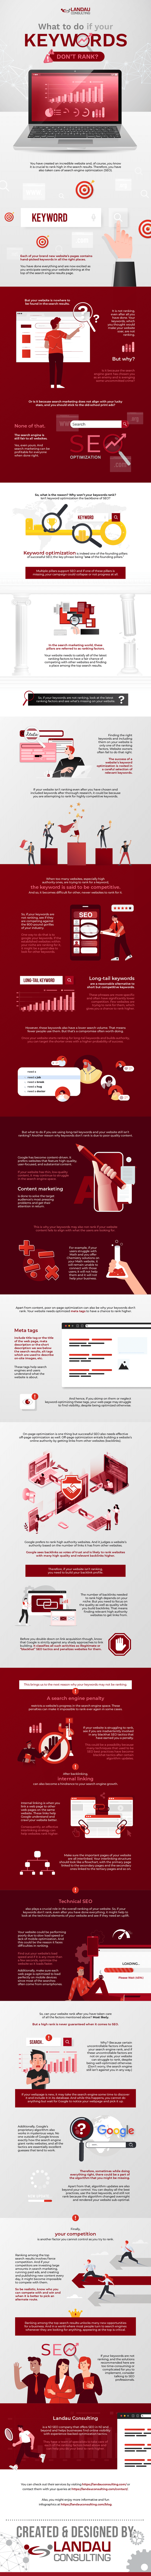 What-to-do-if-your-Keywords-don’t-Rank?-Infographic-image-lc215